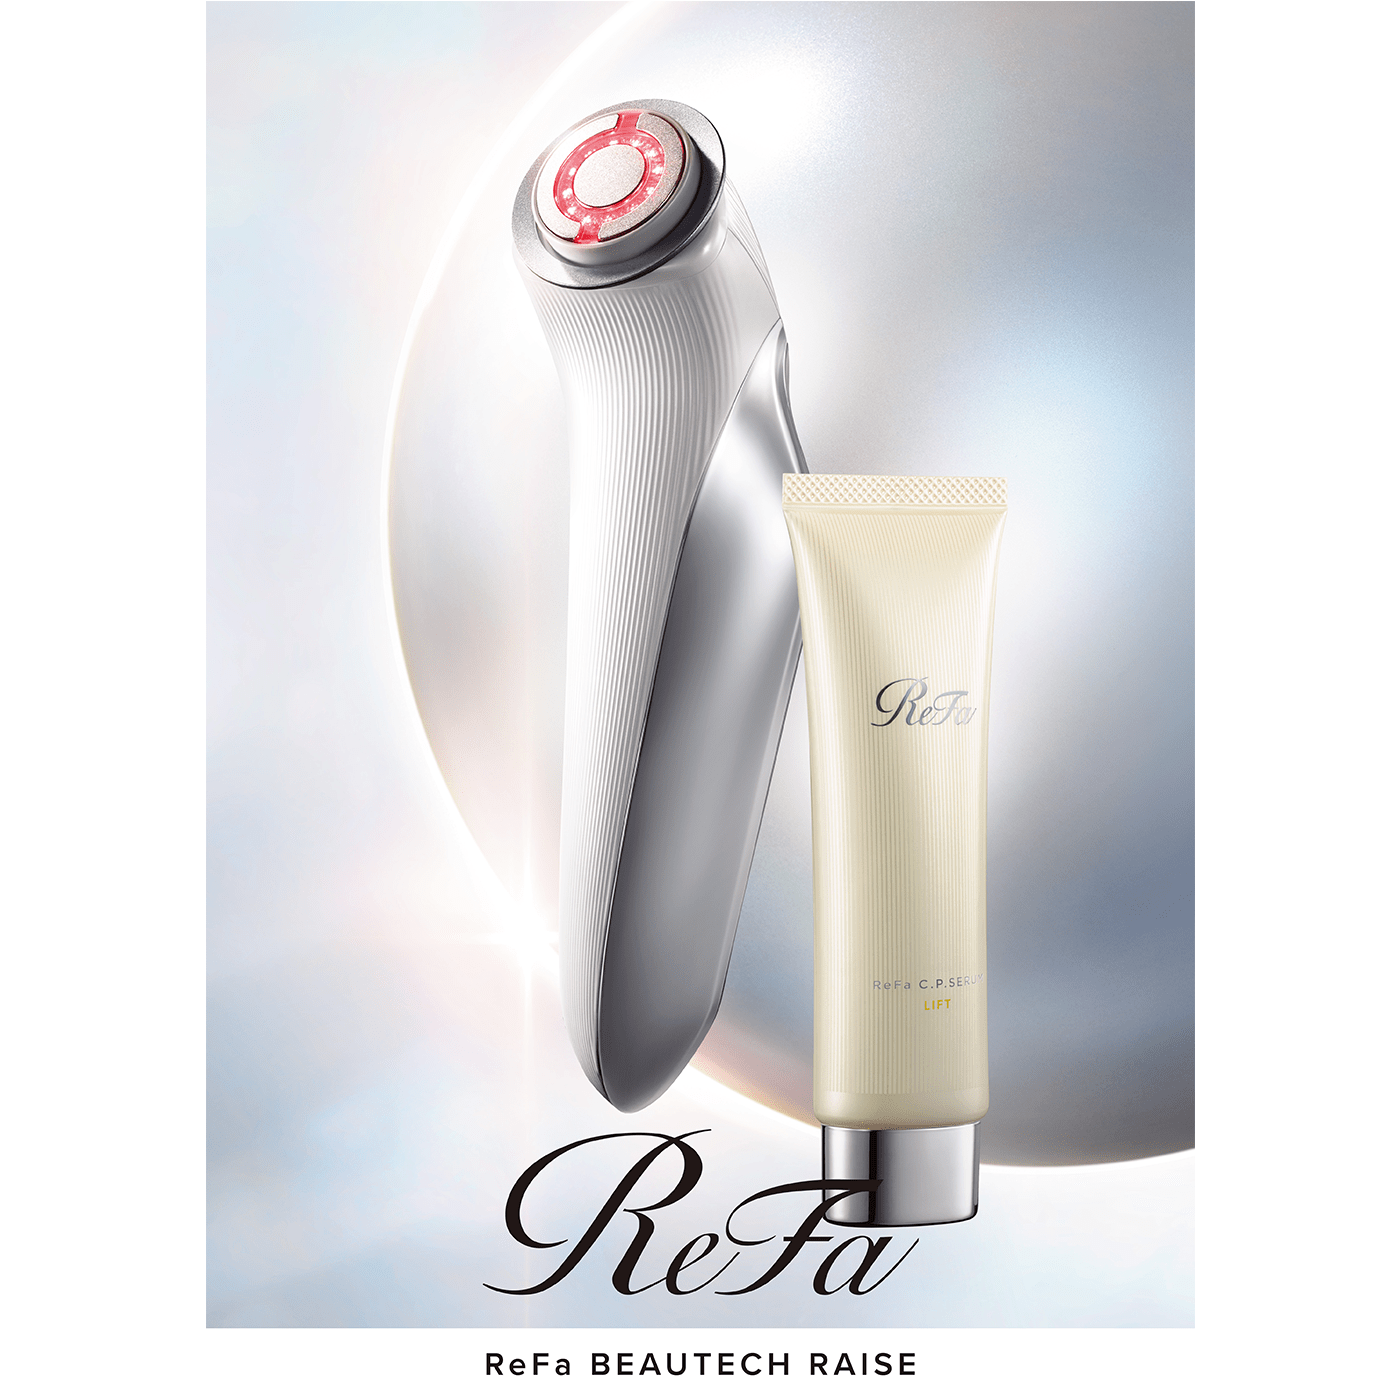 ReFa BEAUTECH Releases New Round of Products. Introducing ReFa BEAUTECH RAISE, which offers a five-minute Skin Nurturing* Program setting to help protect skin from the visible effects of environmental stressors and aging.